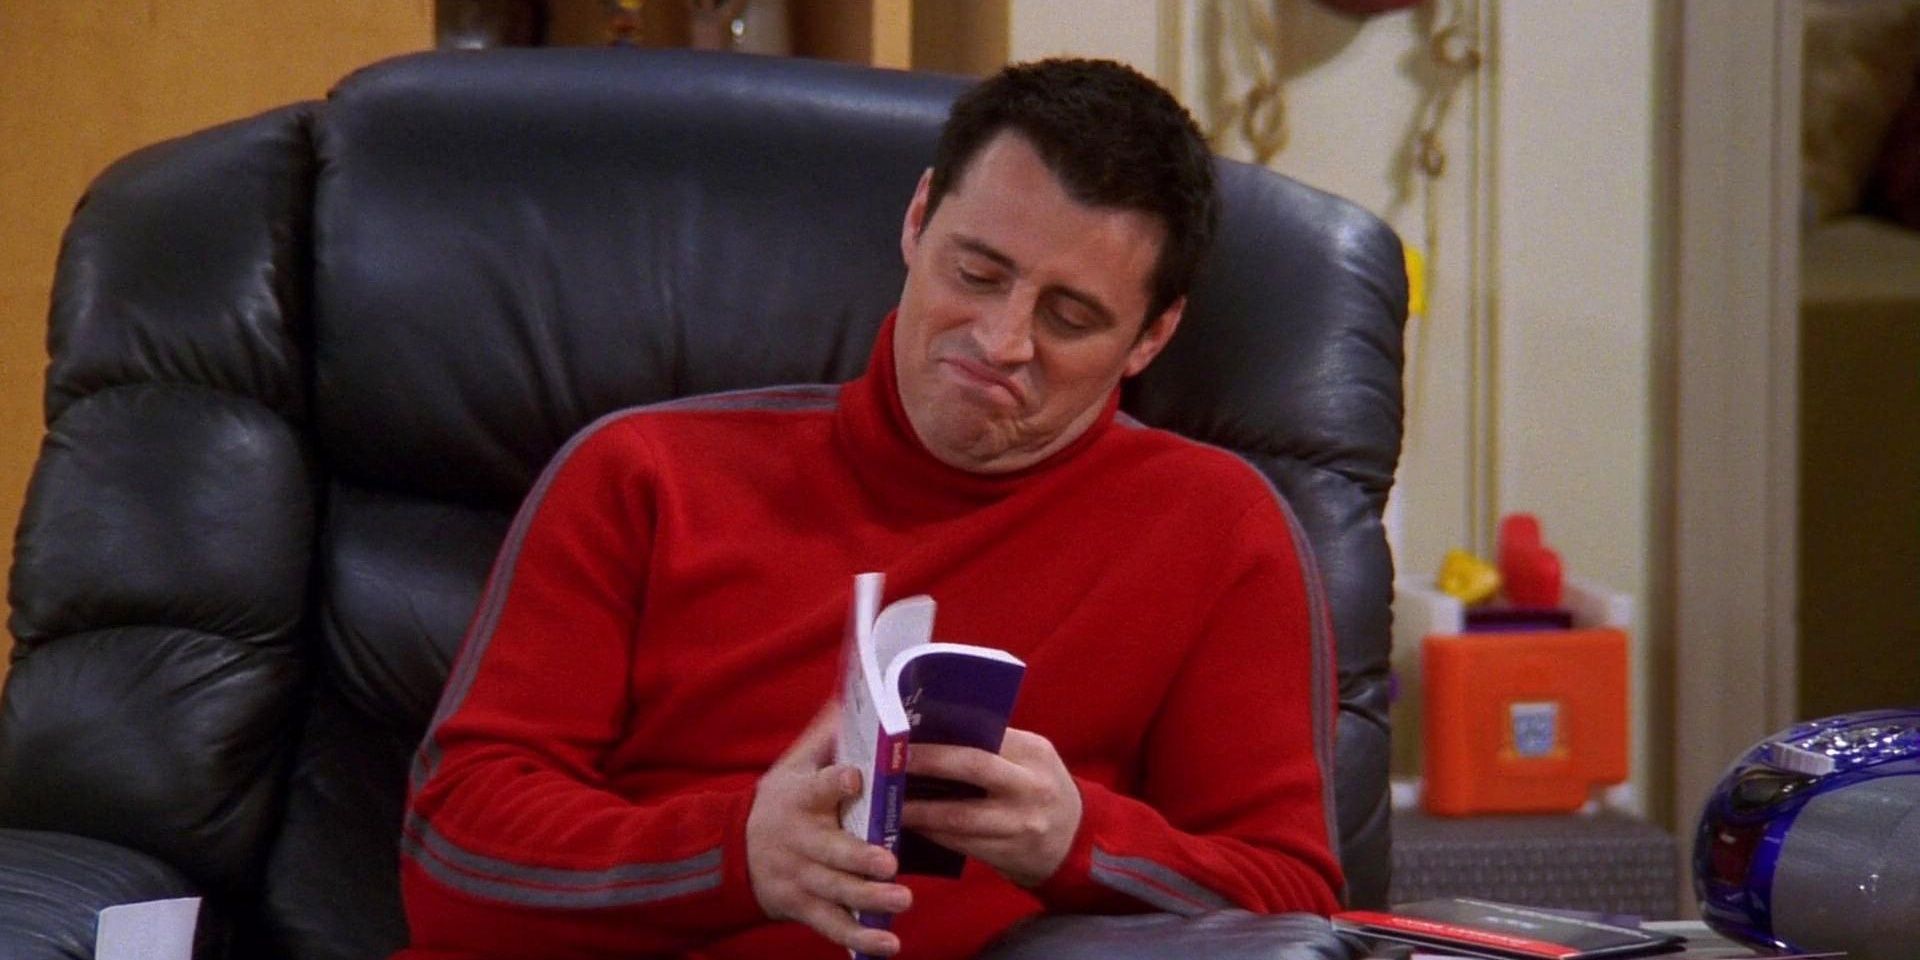 Joey attempts to learn French on his own in Friends